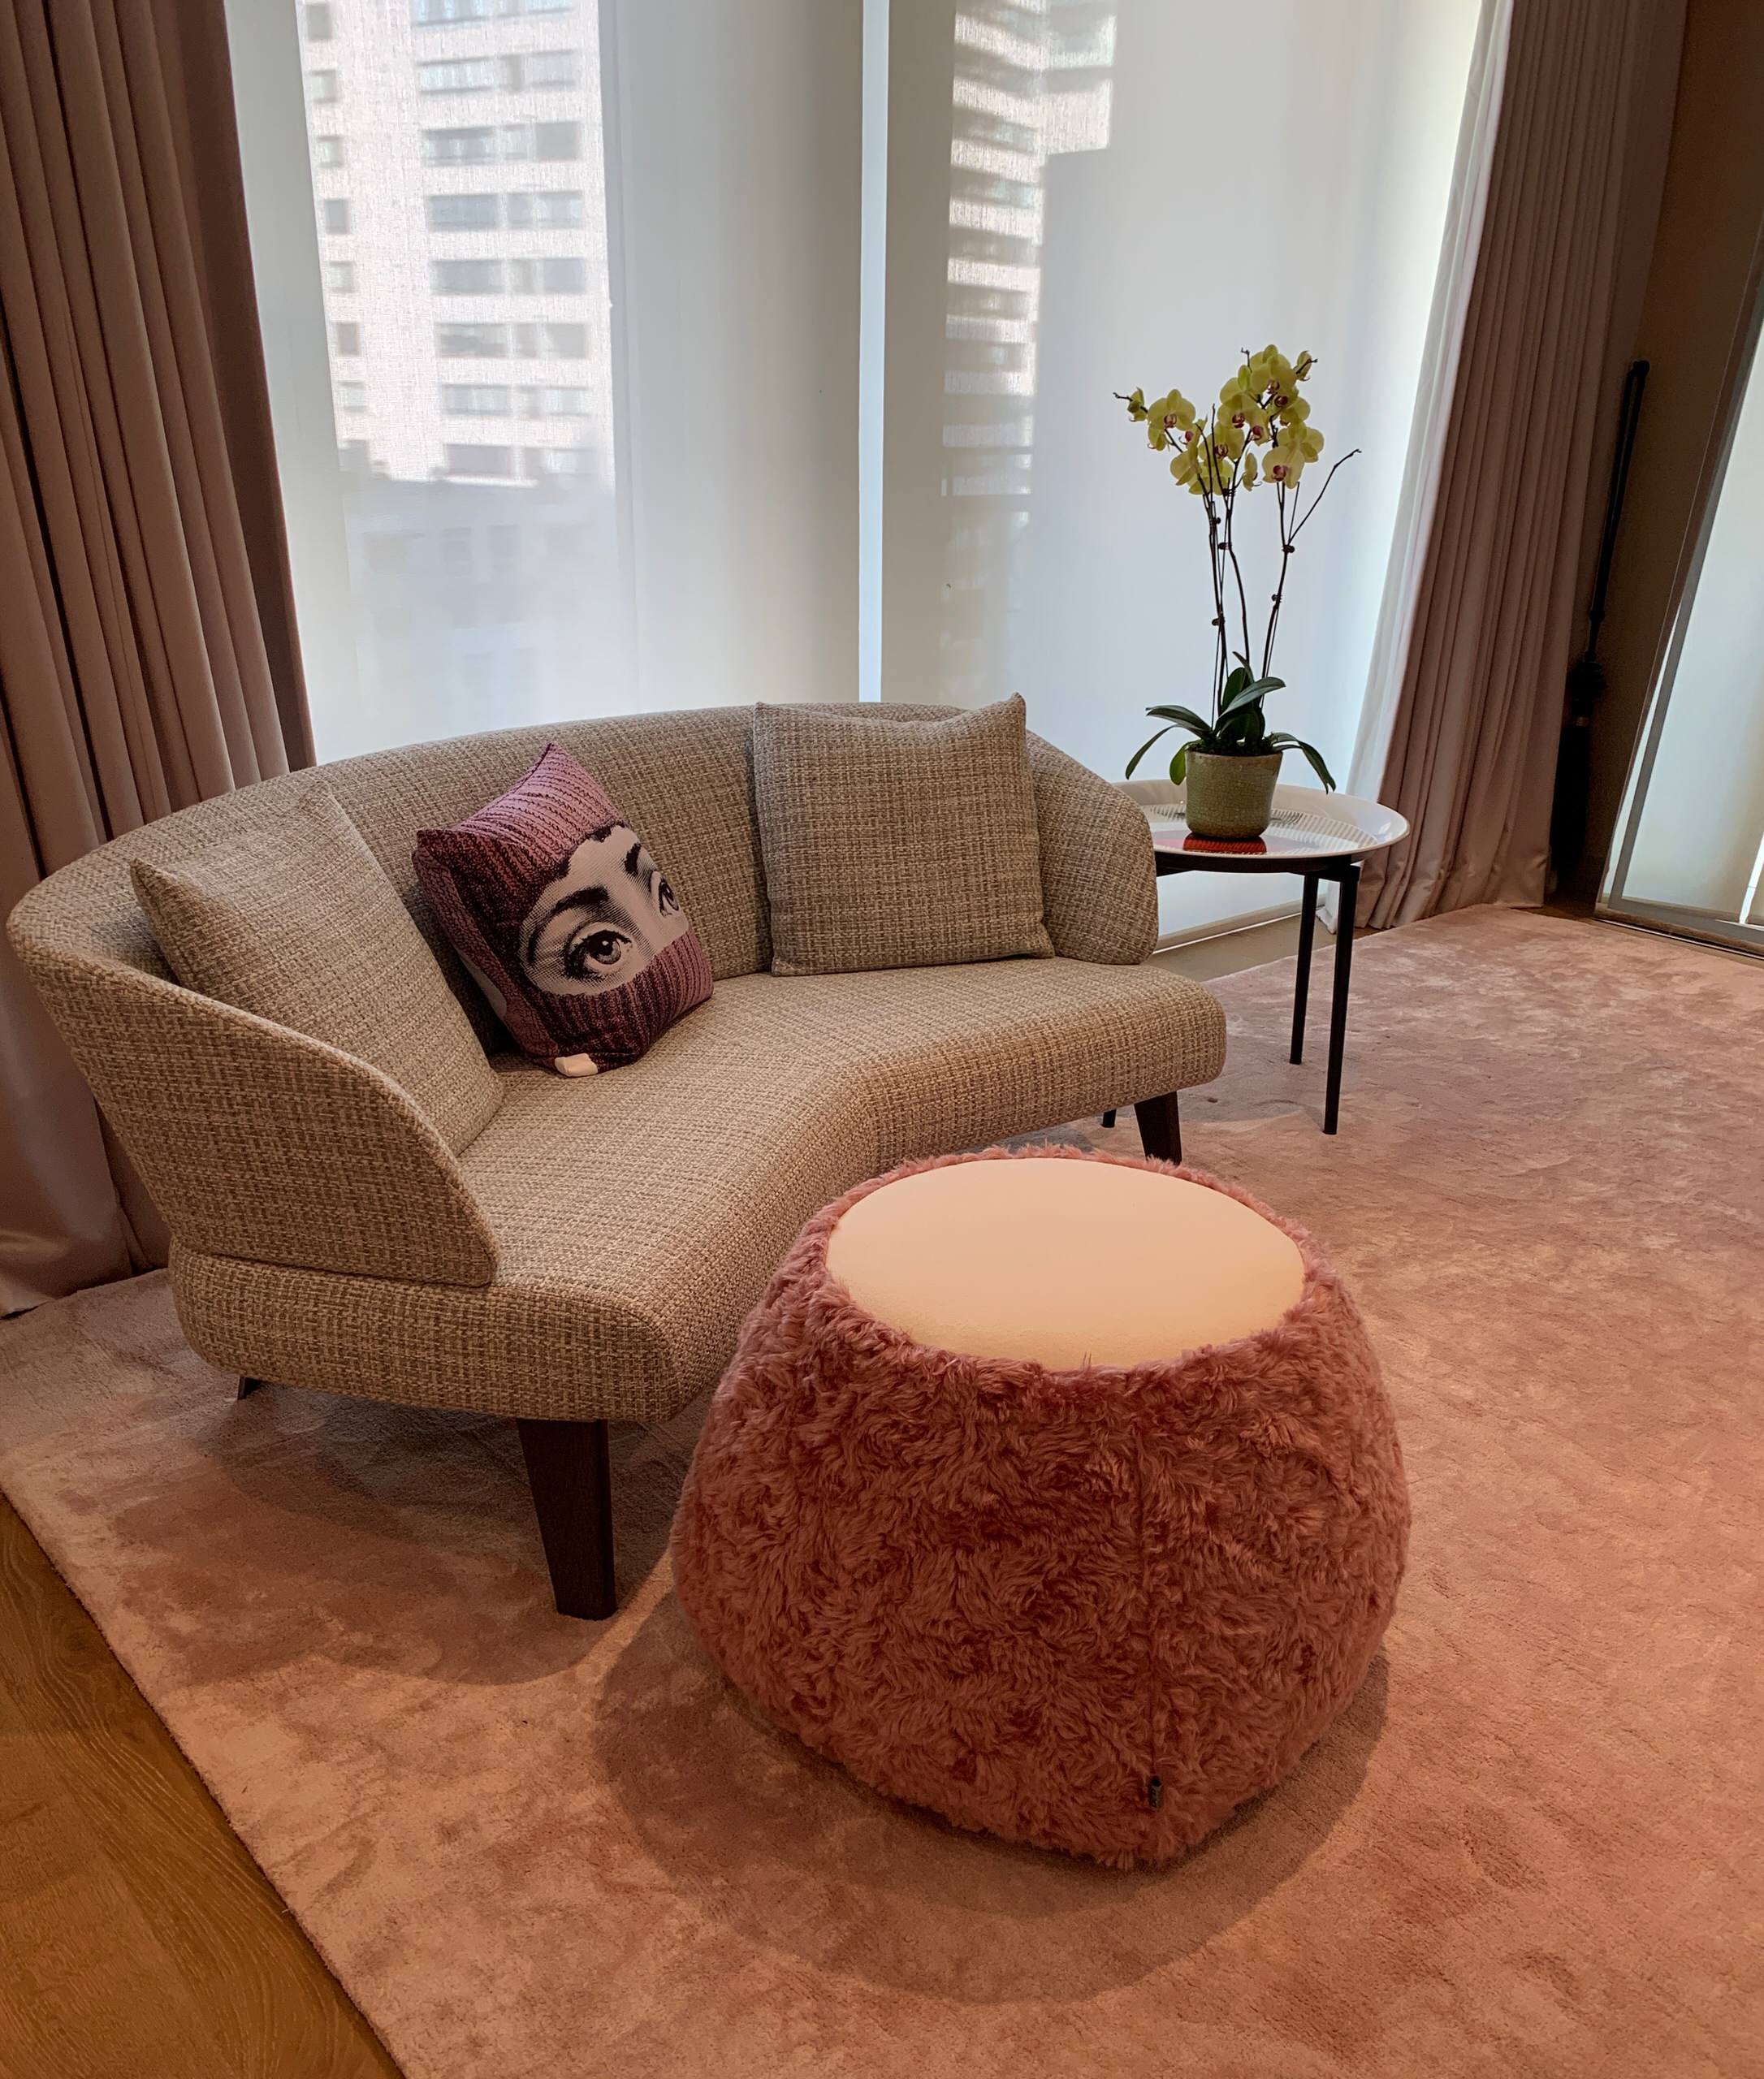 THE WILSHIRE TOWER SUITE